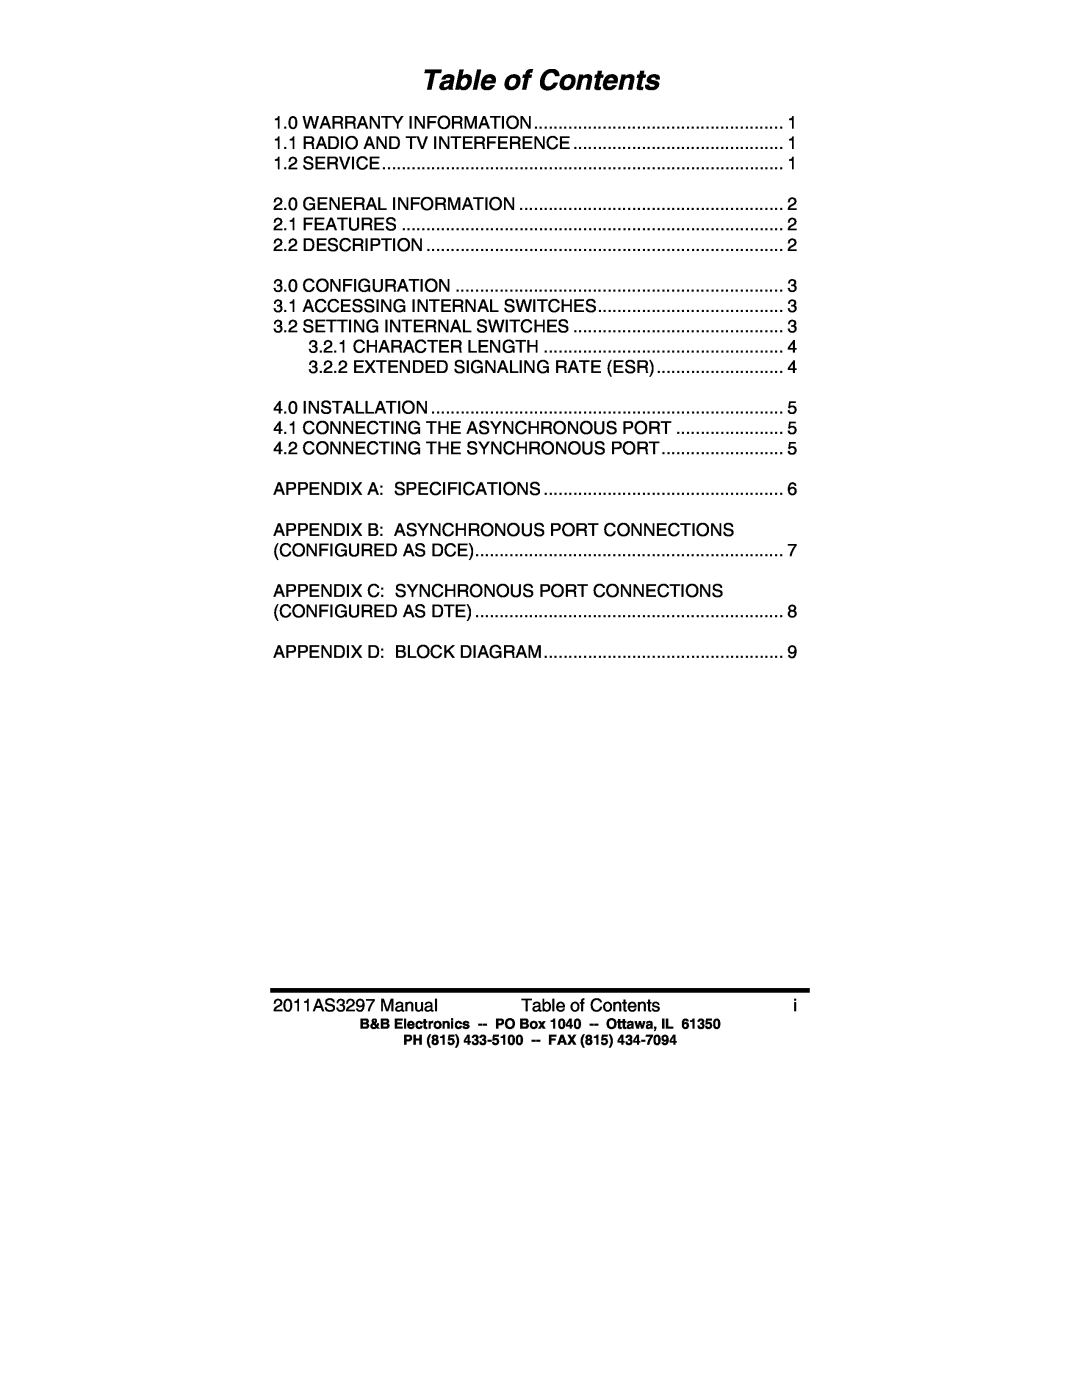 B&B Electronics 2011 manual Table of Contents 